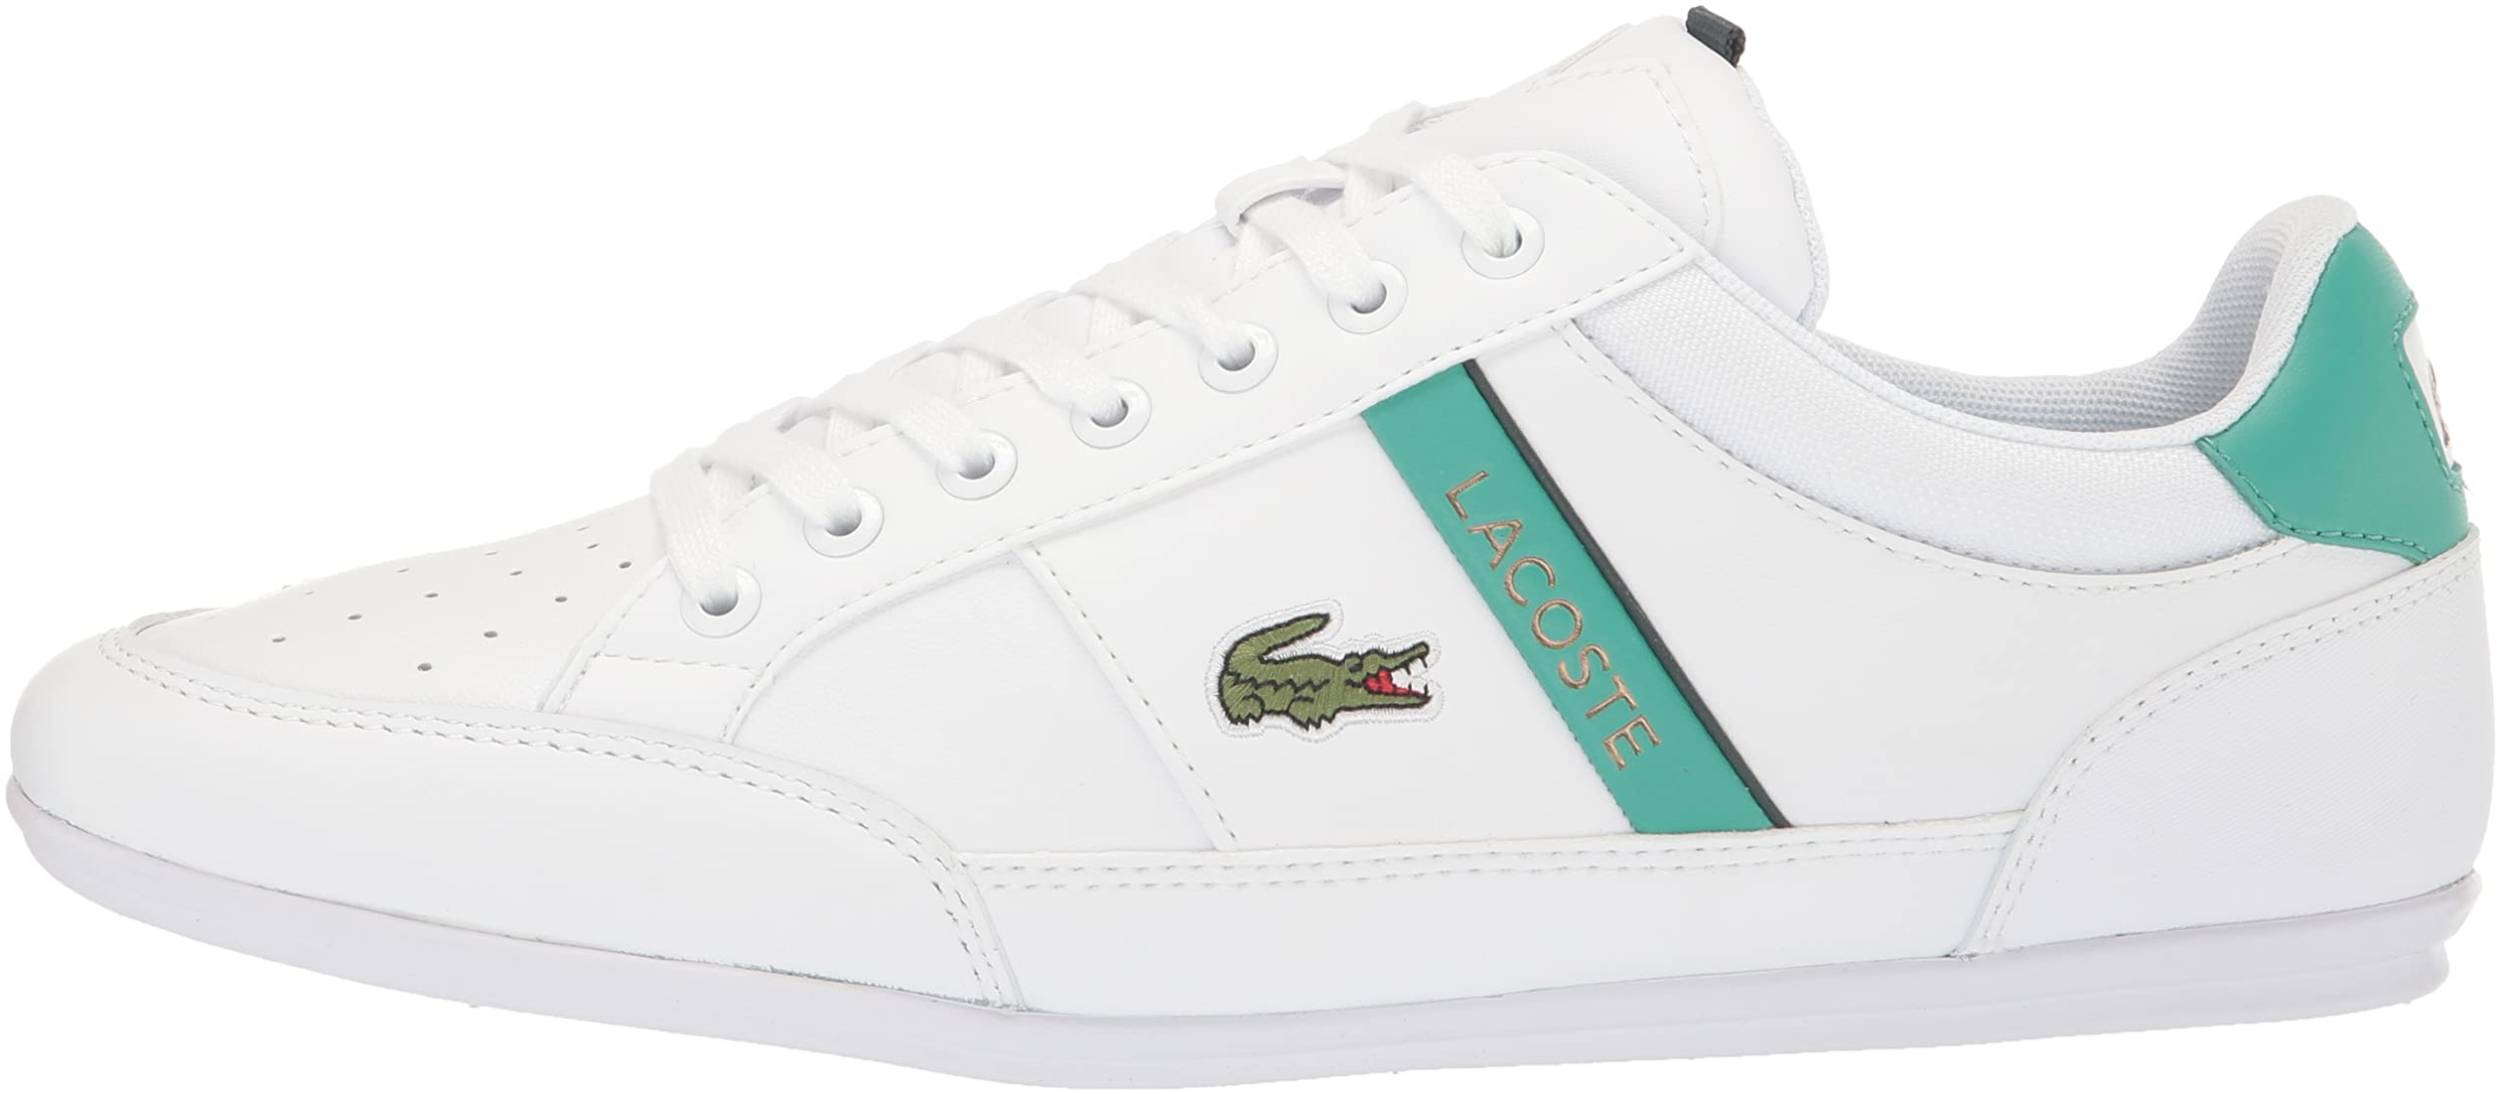 10+ Lacoste sneakers: Save up to 51% | RunRepeat